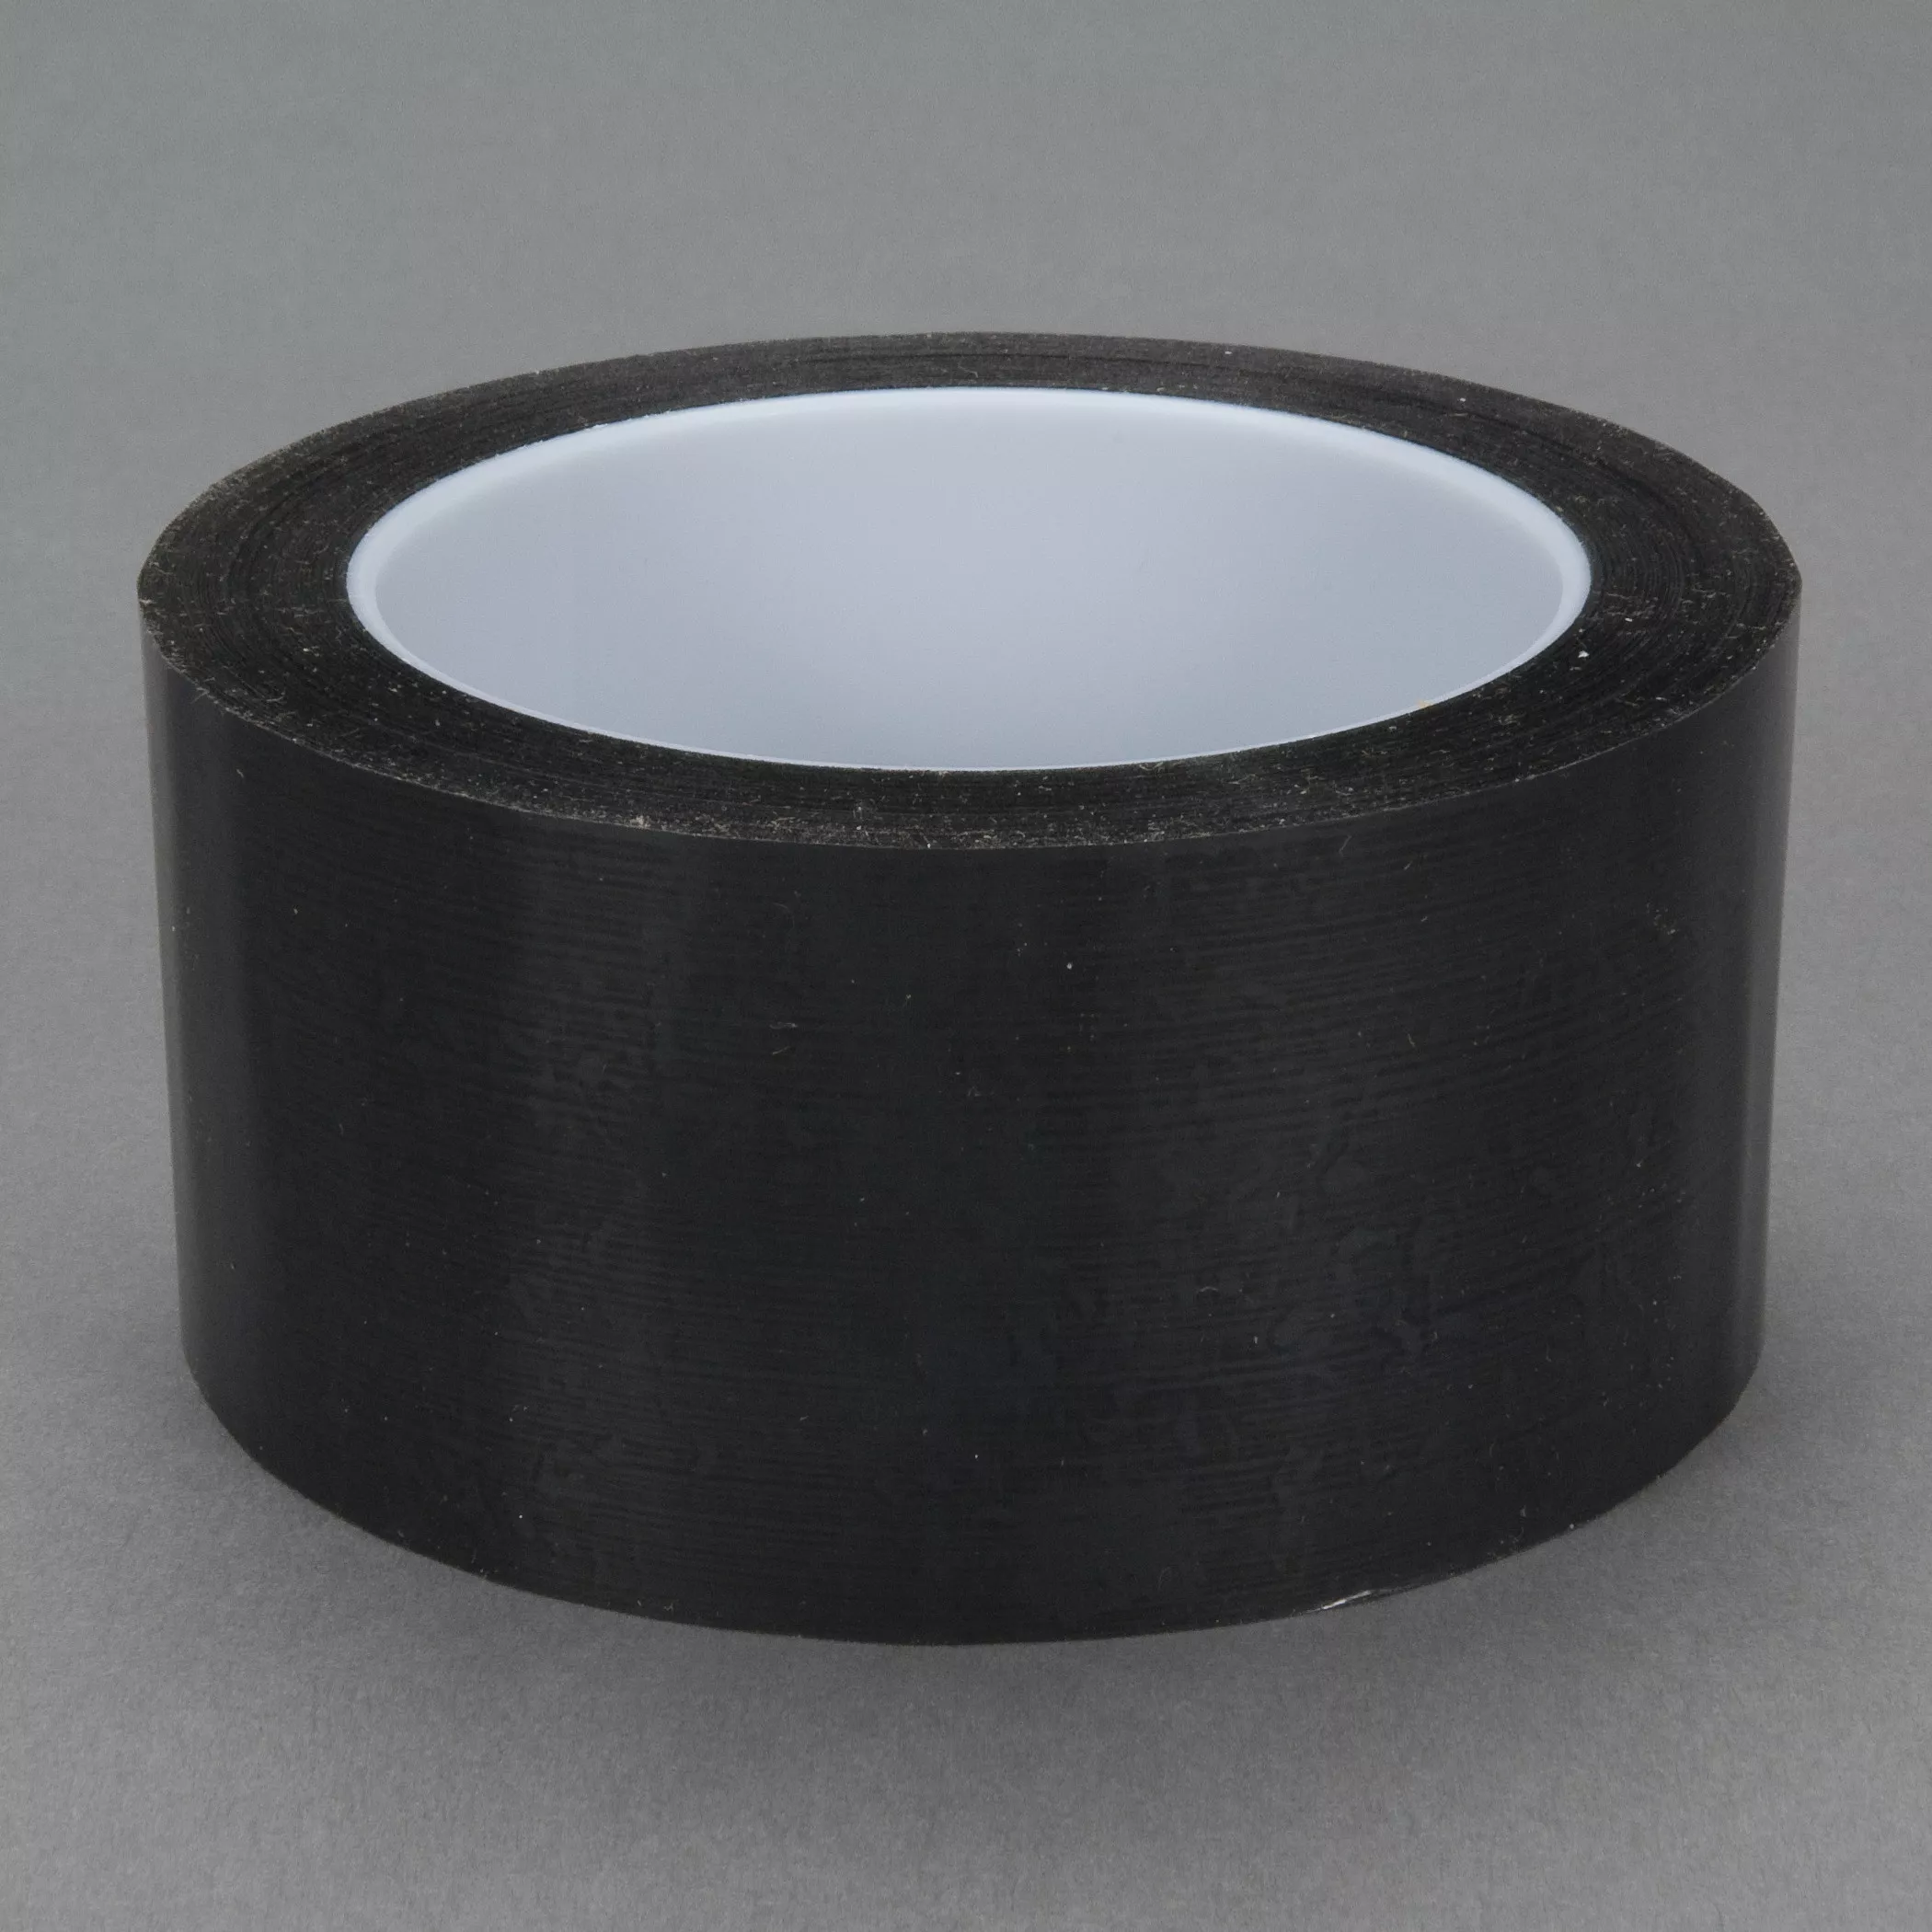 3M™ Polyester Film Tape 850, Black, 2 in x 72 yd, 1.9 mil, 24 Roll/Case